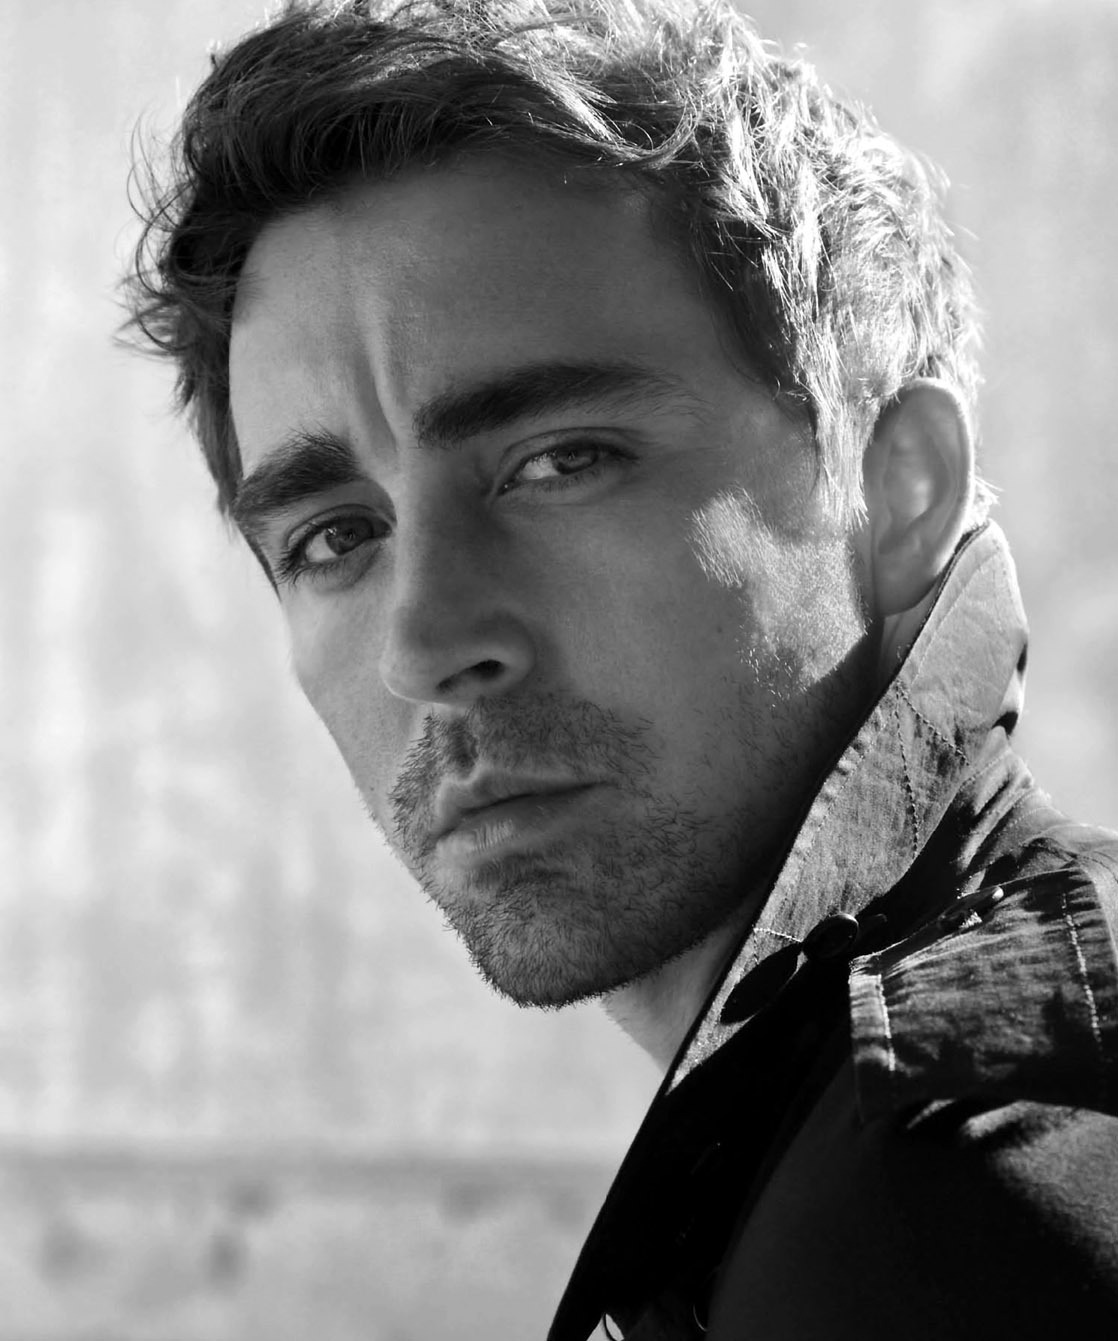 pace-lee-pace-11379447-1118-1341